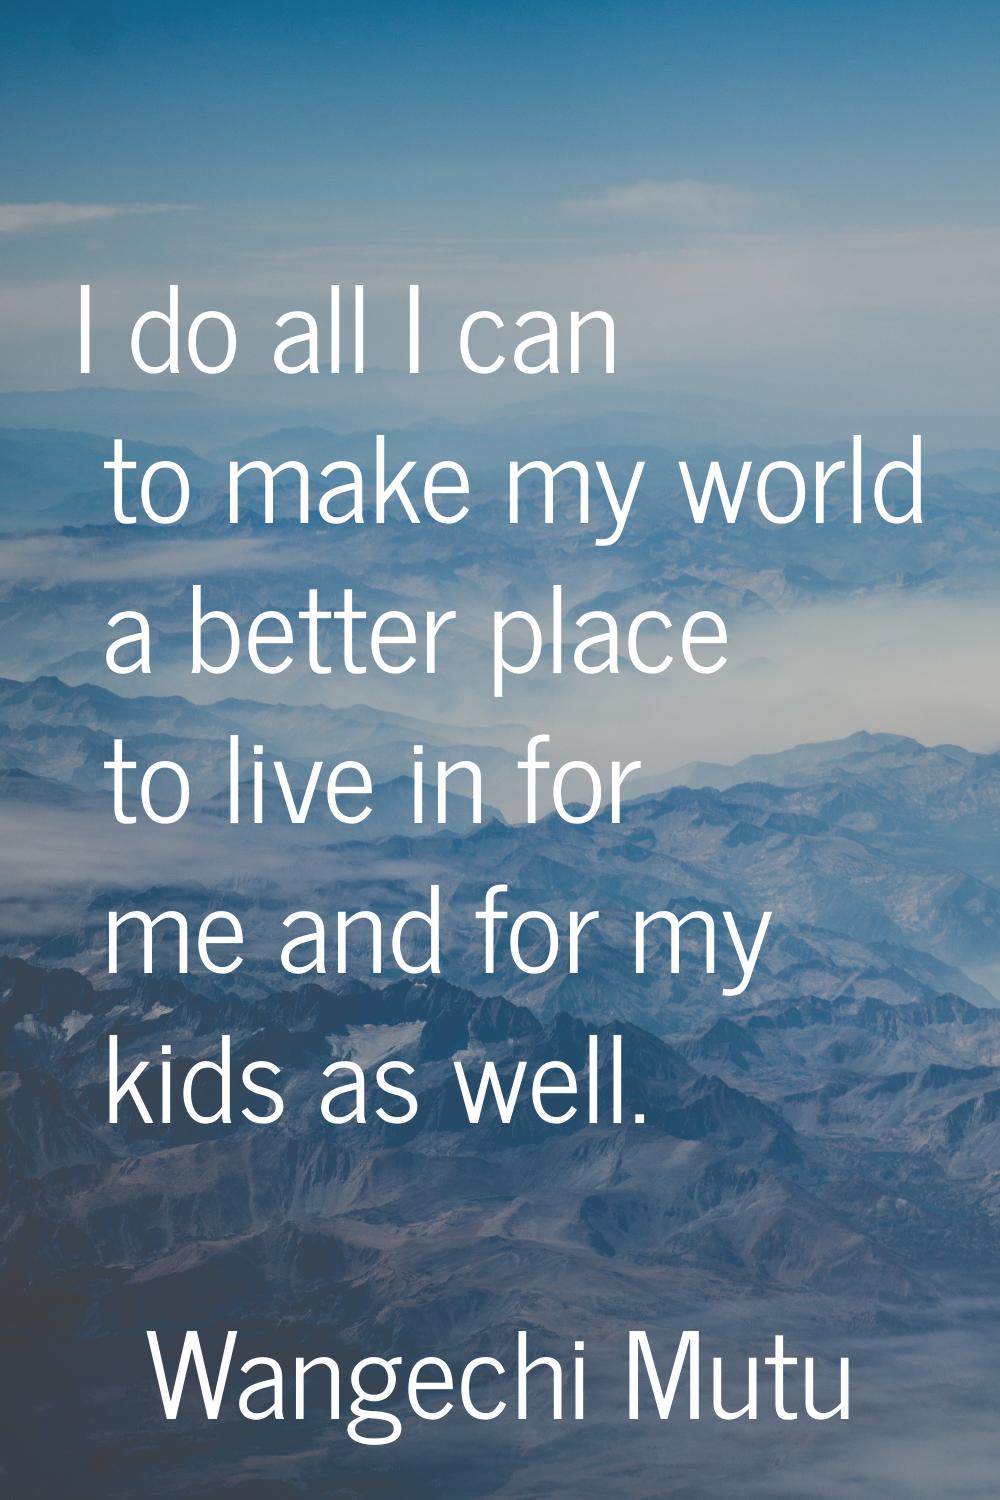 I do all I can to make my world a better place to live in for me and for my kids as well.